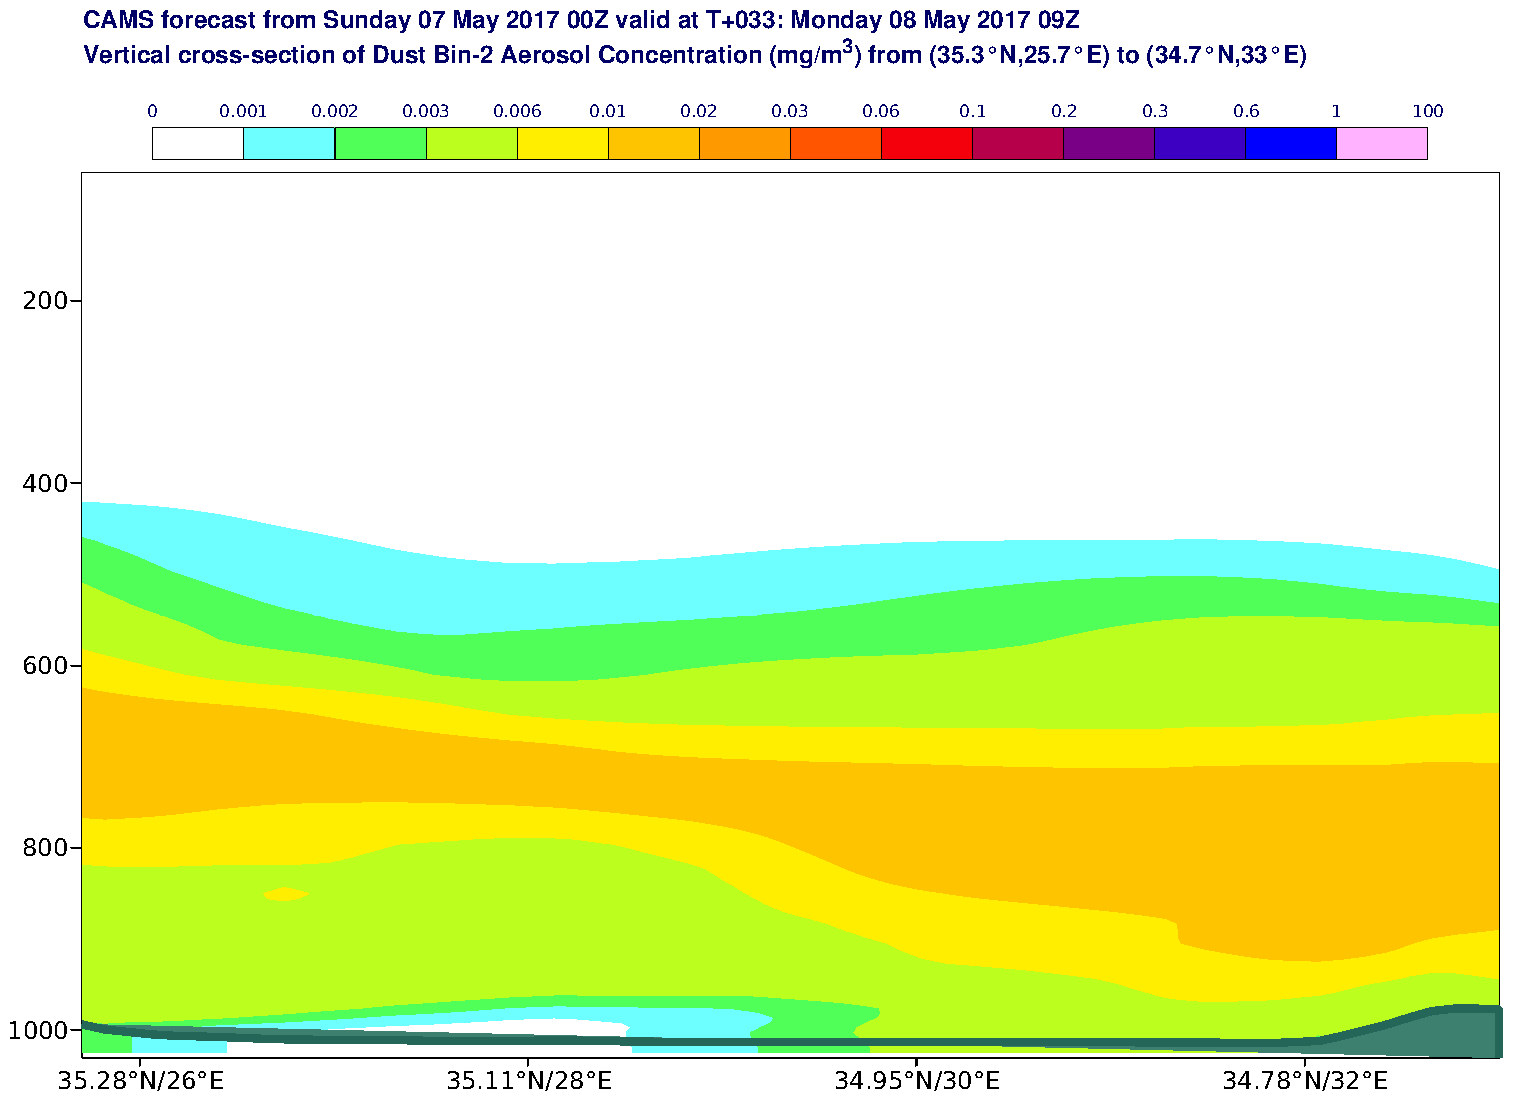 Vertical cross-section of Dust Bin-2 Aerosol Concentration (mg/m3) valid at T33 - 2017-05-08 09:00